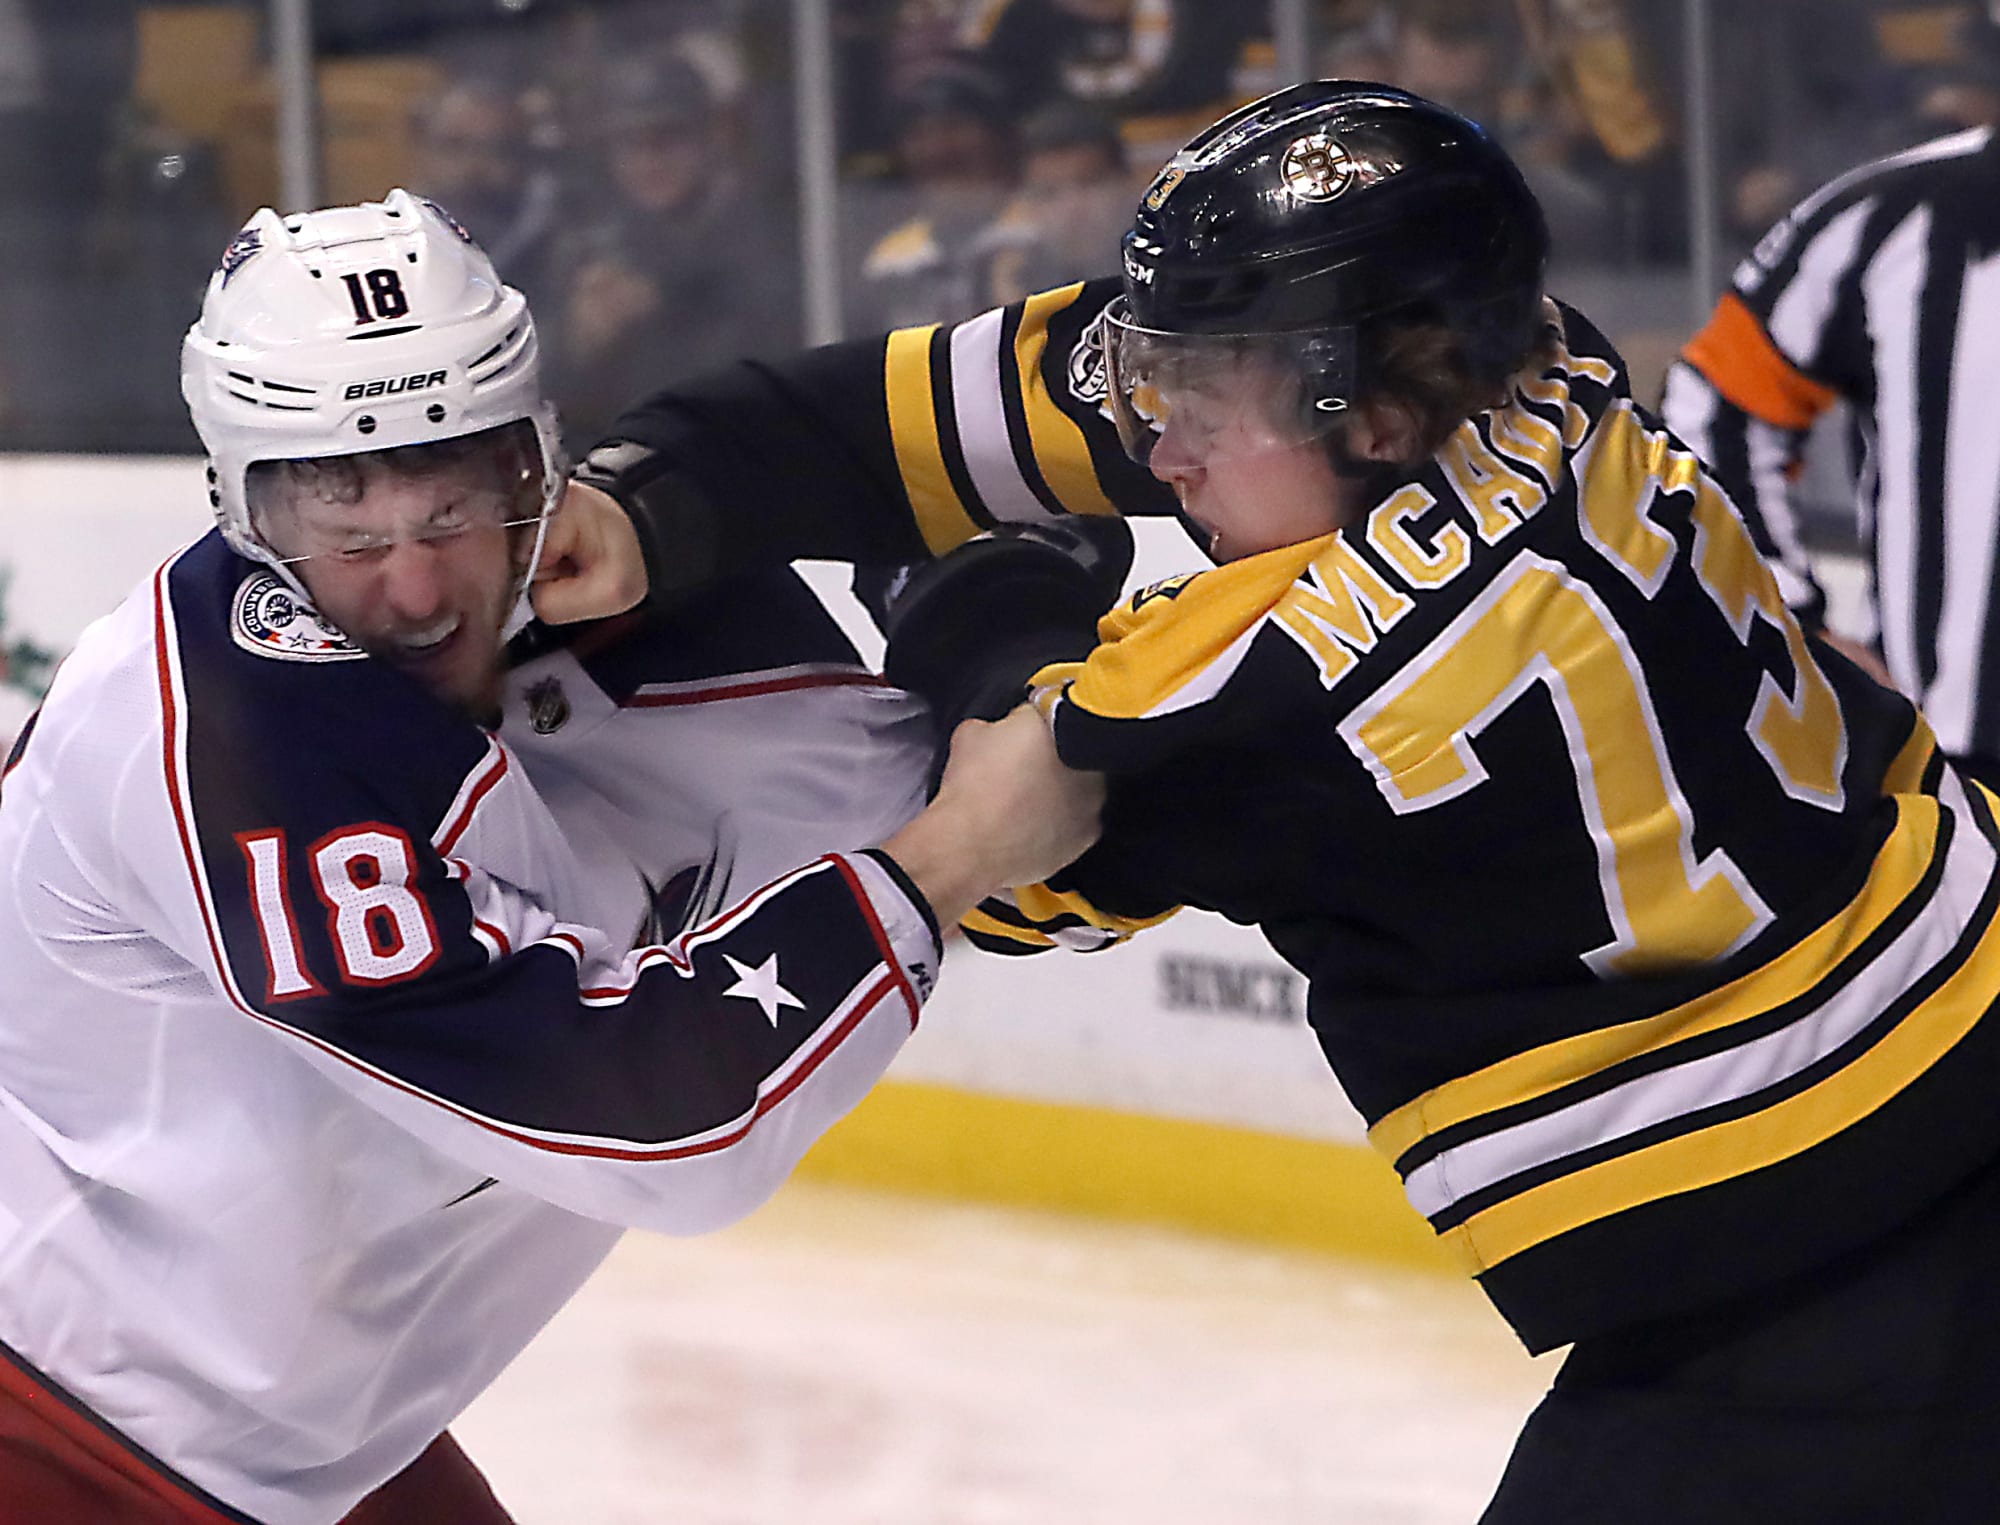 Boston Bruins player who grew up in Dublin to face Blue Jackets in